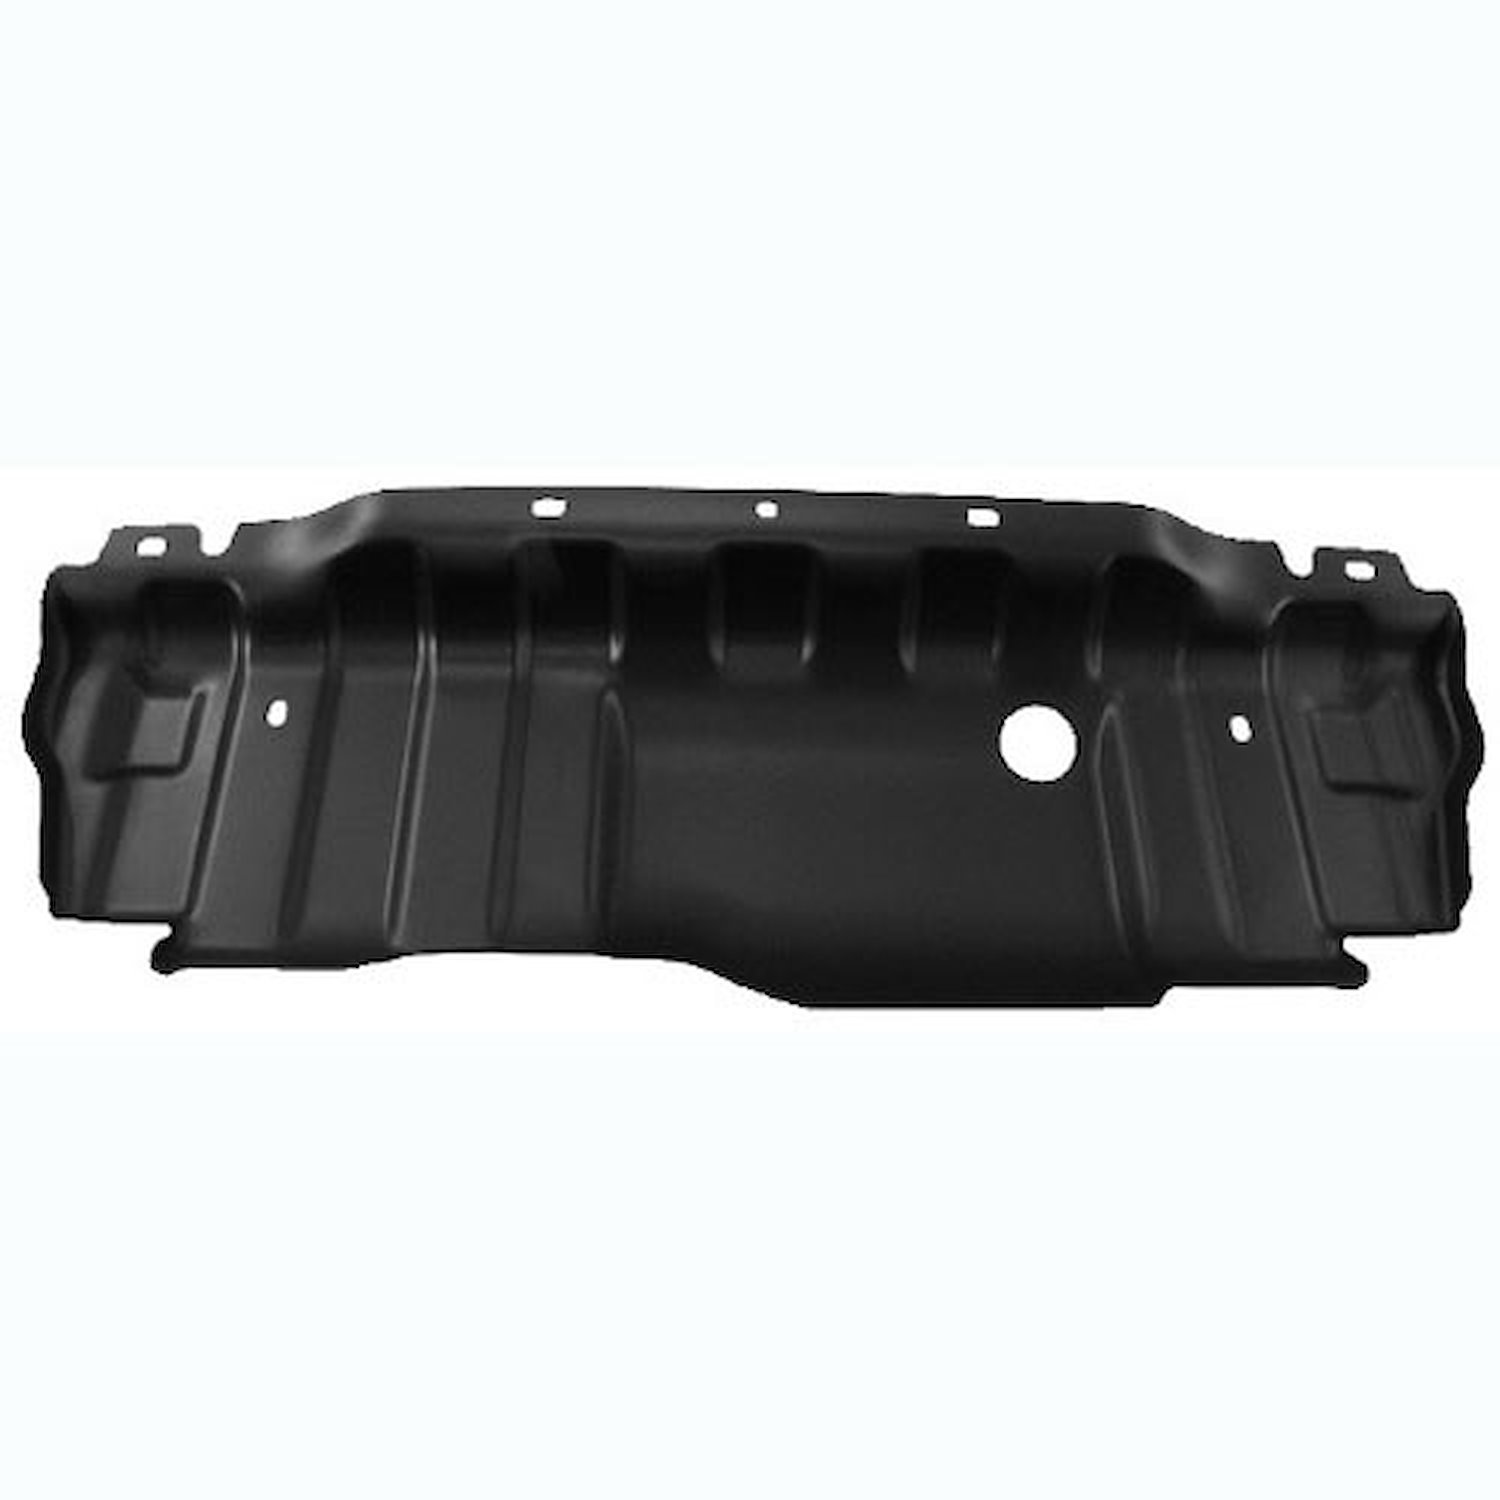 Rubicon Skid Plate for 2007-2016 Jeep JK